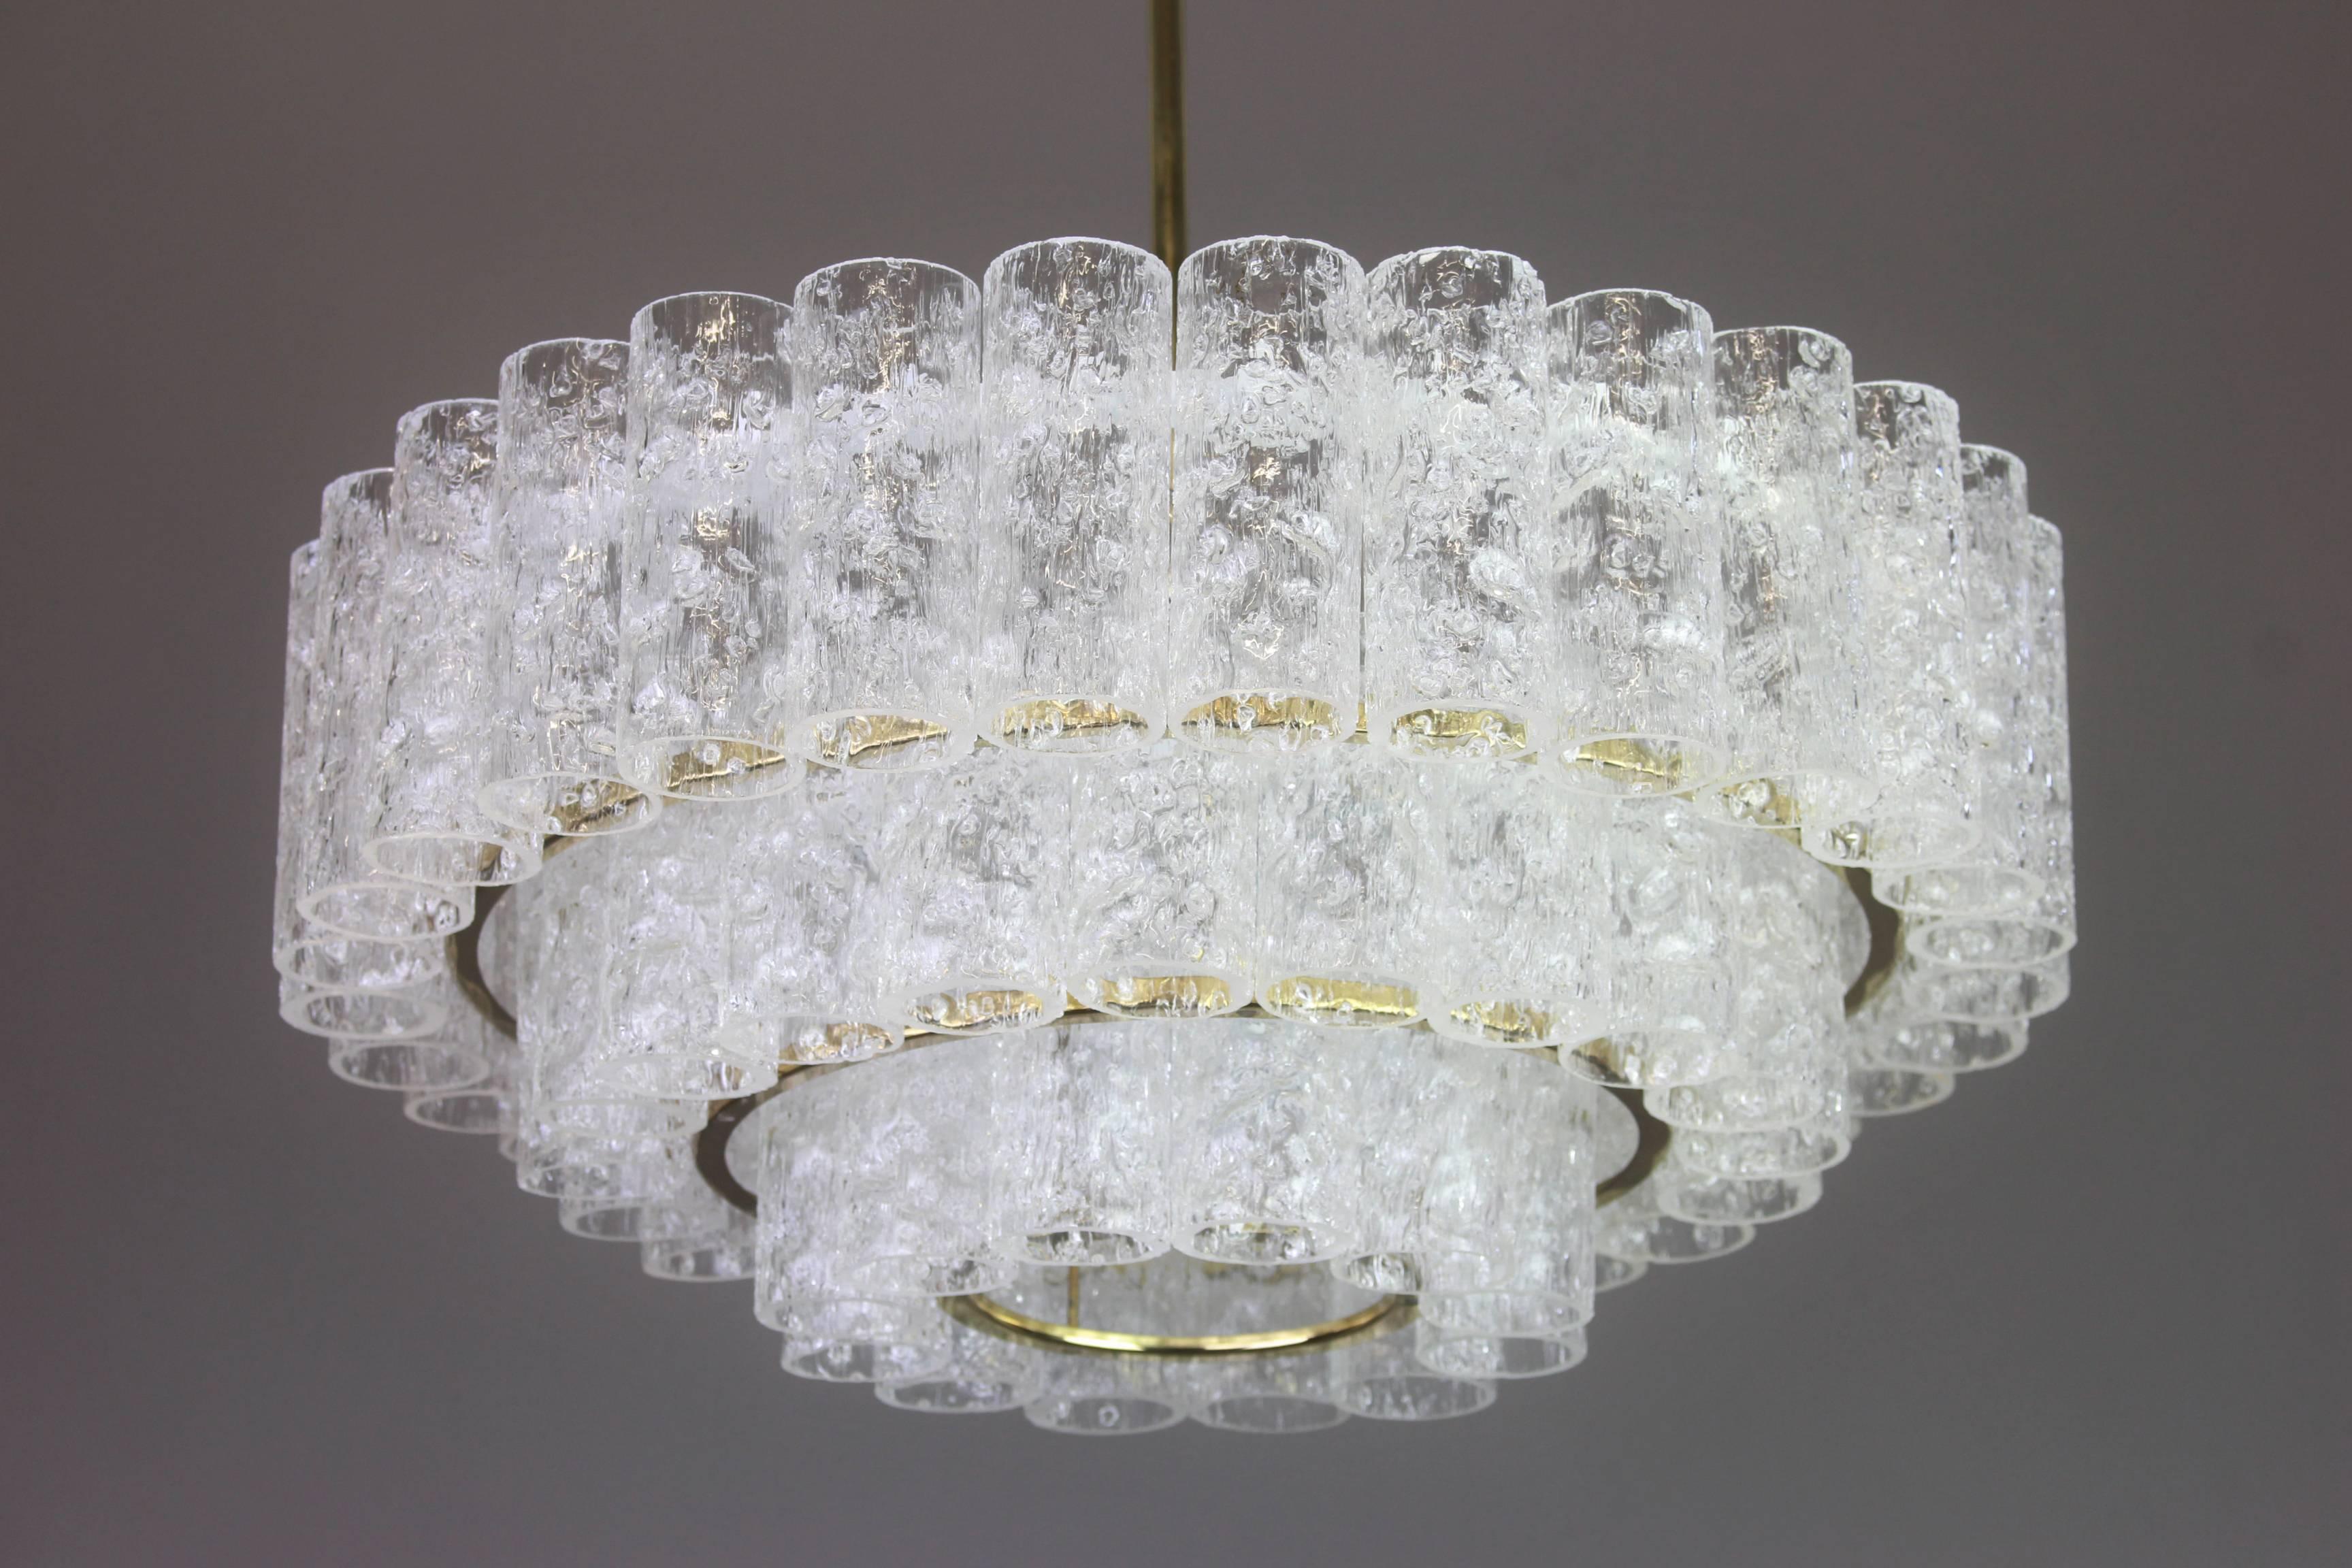 Fantastic three-tier midcentury chandelier by Doria, Germany, manufactured circa 1960-1969. Three rings of Murano glass cylinders suspended from a fixture.

Heavy quality and in very good condition. Cleaned, well-wired and ready to use. 

The